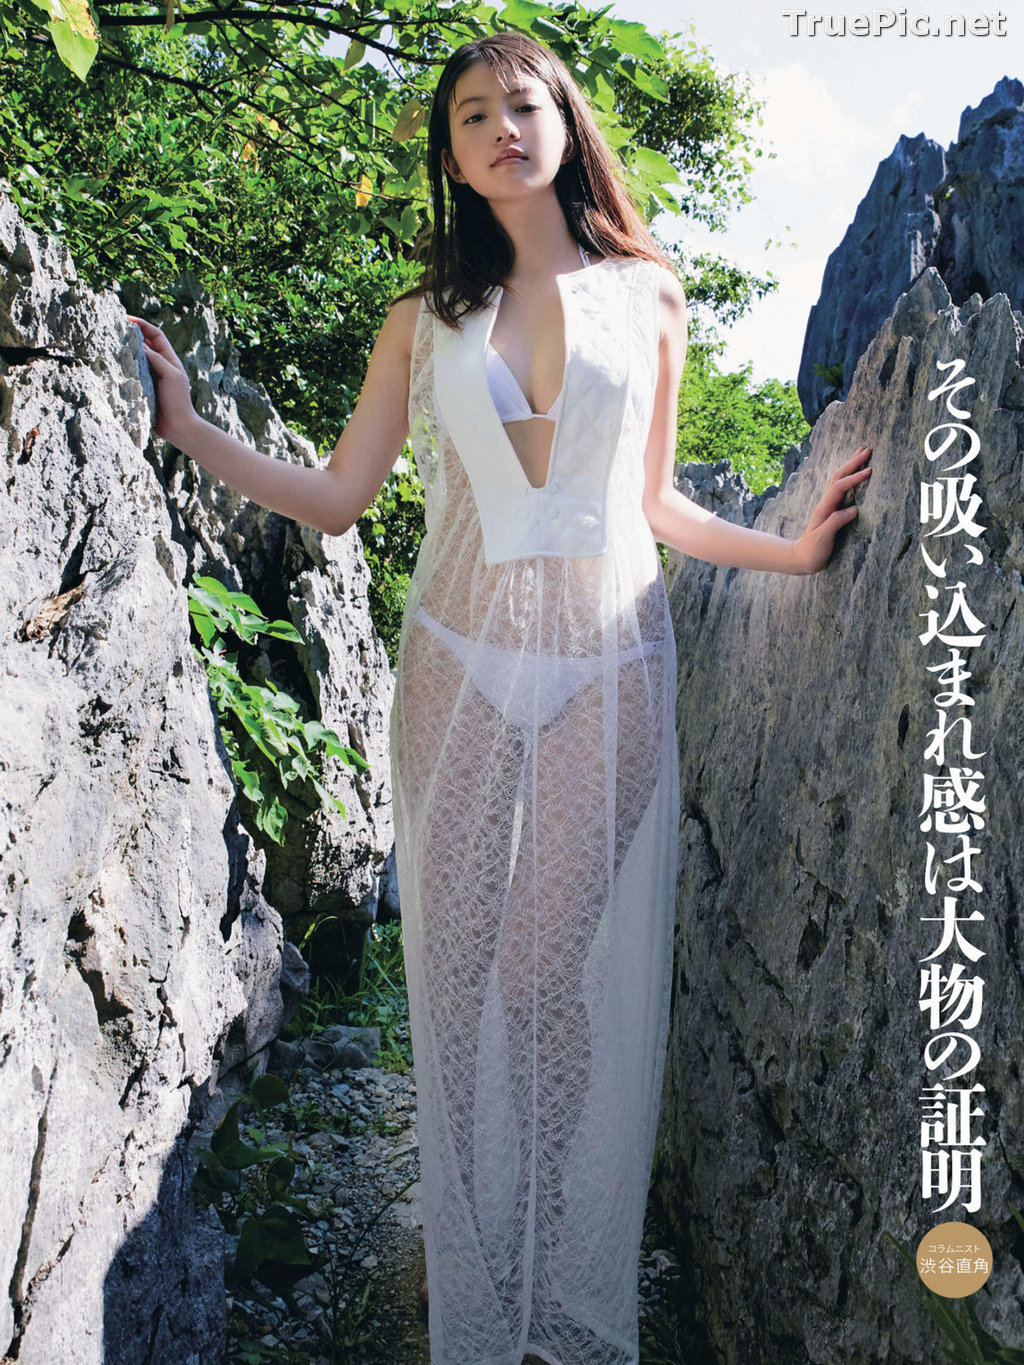 Image Japanese Actress and Model - Mio Imada (今田美櫻) - Sexy Picture Collection 2020 - TruePic.net - Picture-194